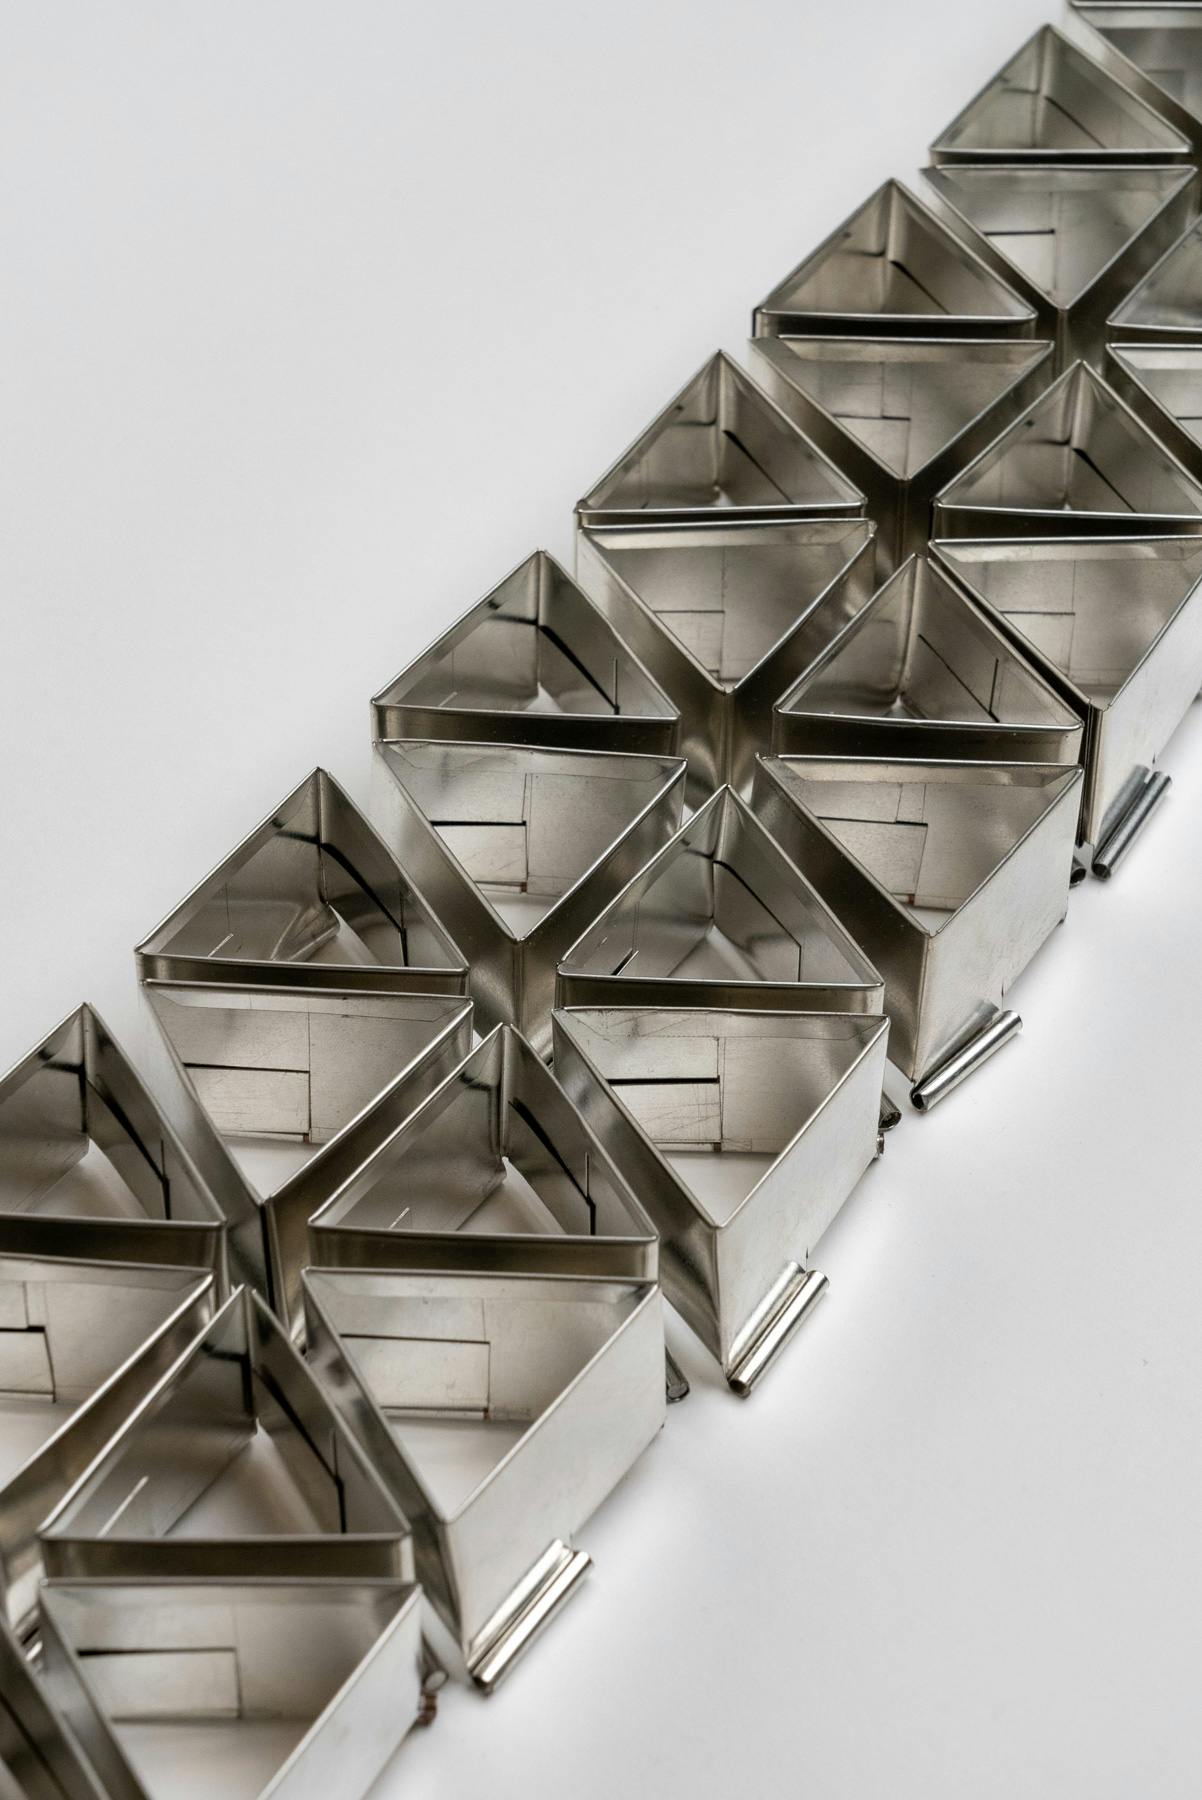 Close-up of the triangular prisms. The folds and layers that result from their construction are visible.